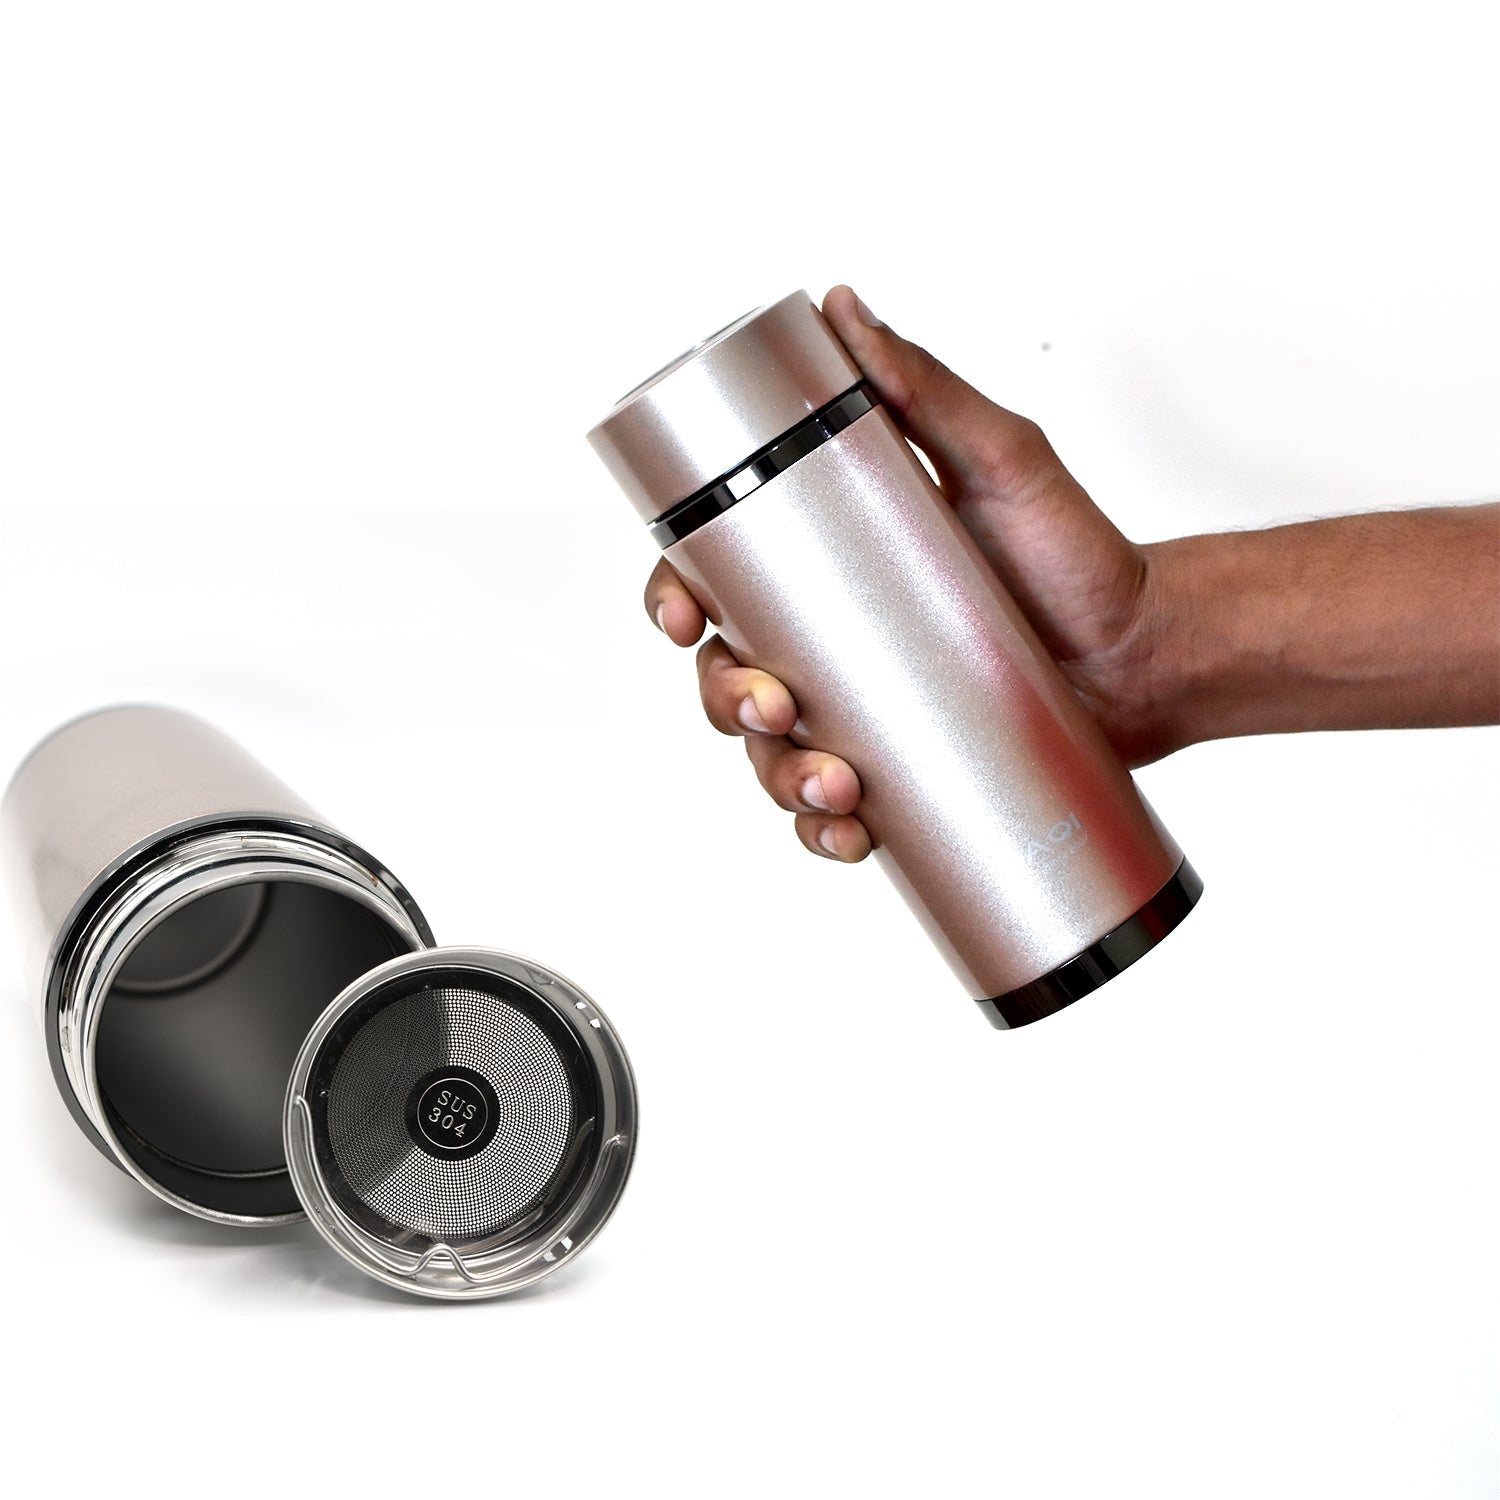 6422 Stainless Steel Bottle used in all households and official purposes for storing water and beverages etc.